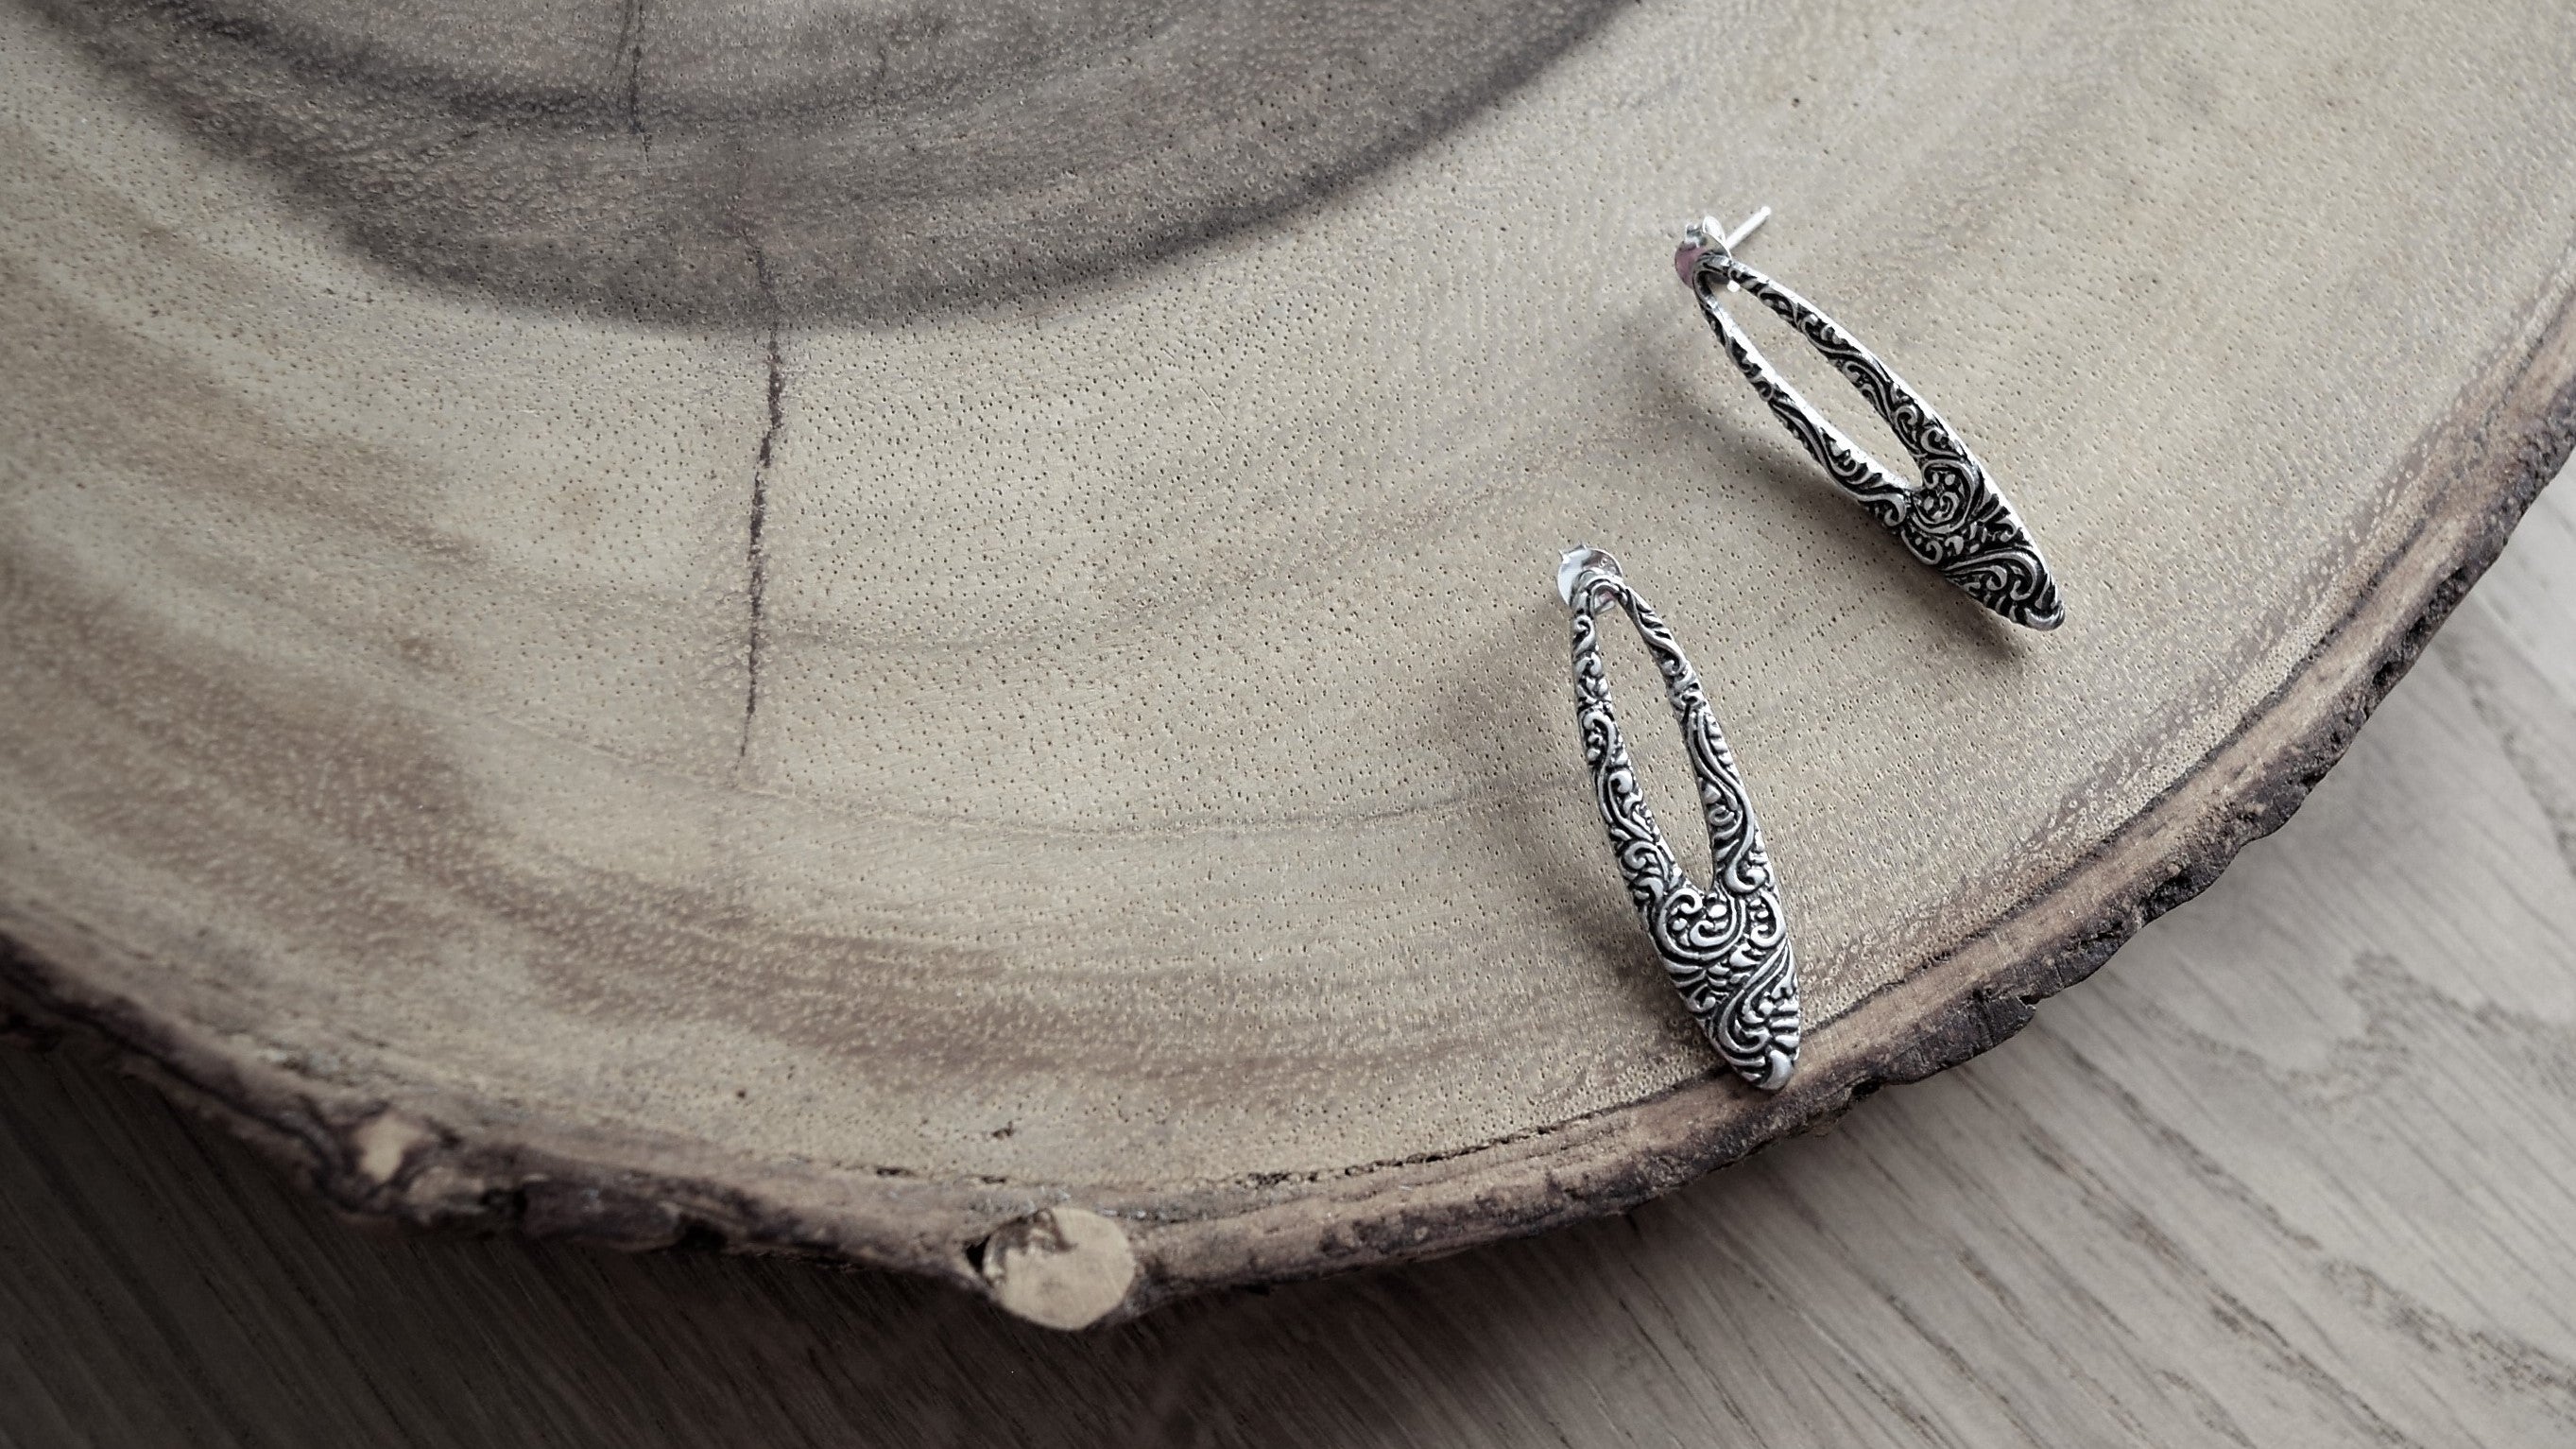 Gift ideas for Chinese New Year and Valentine's Day: simple elegant oval shaped silver earrings with intricate patterns designed in Singapore, handmade in Bali.